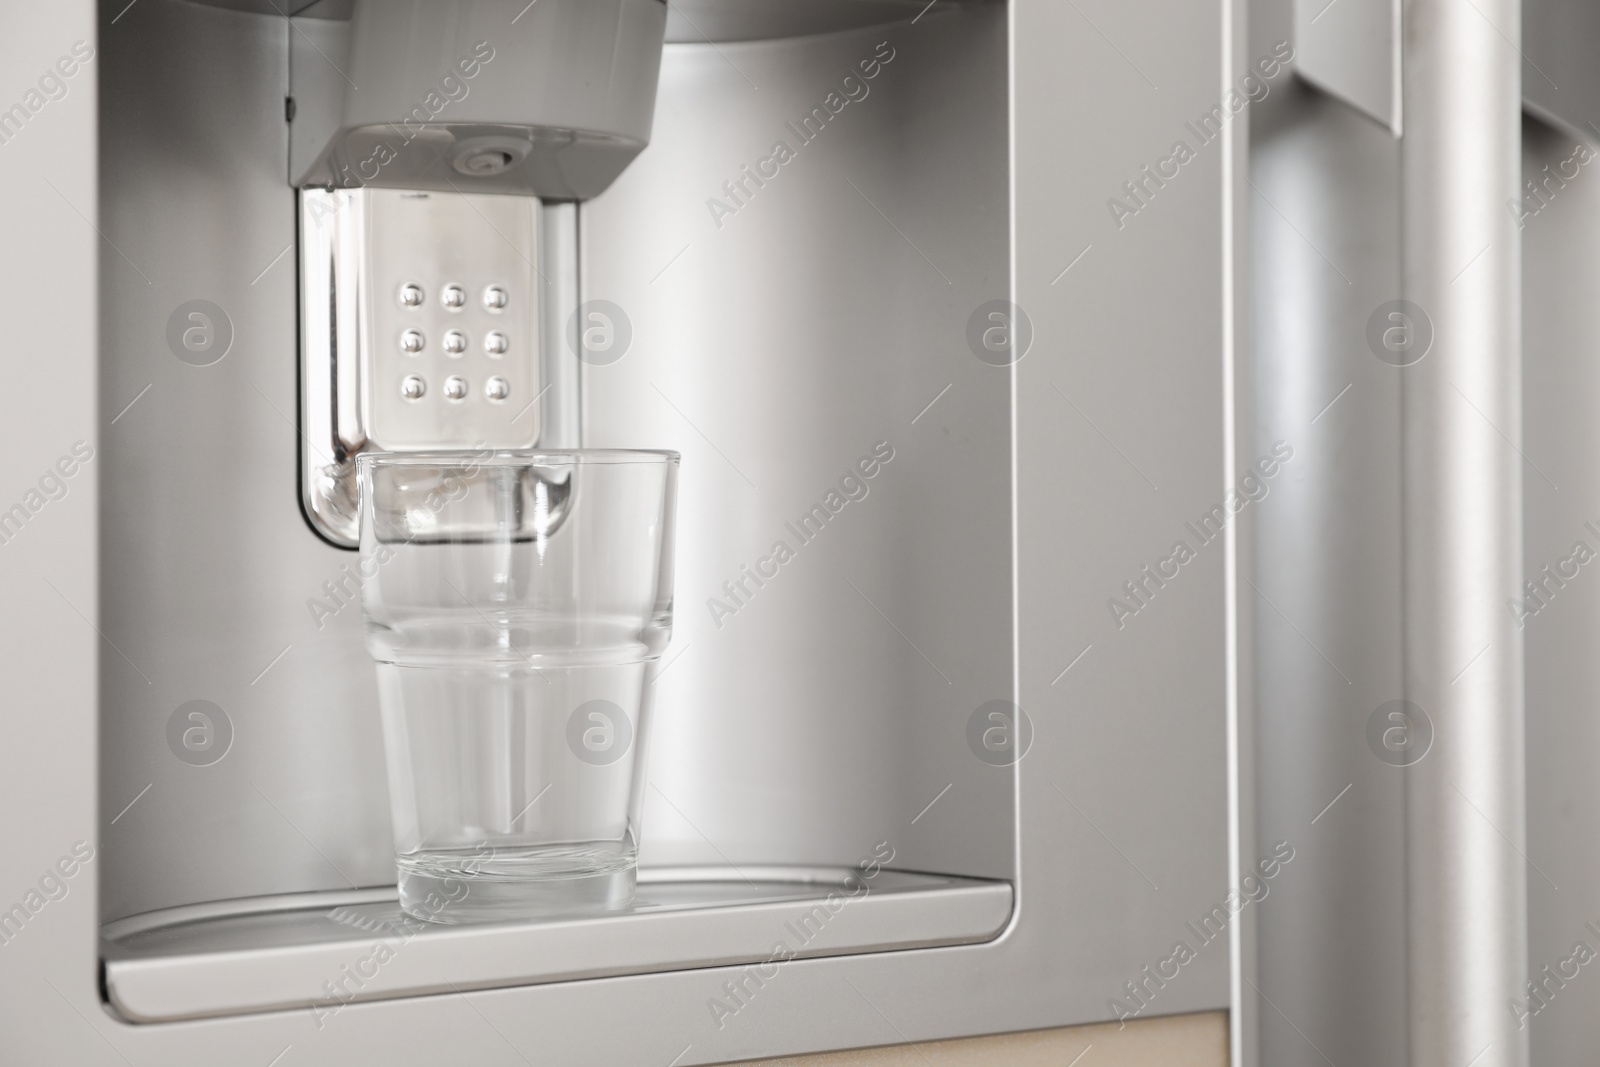 Photo of Refrigerator with ice and water system, closeup. Modern kitchen appliance